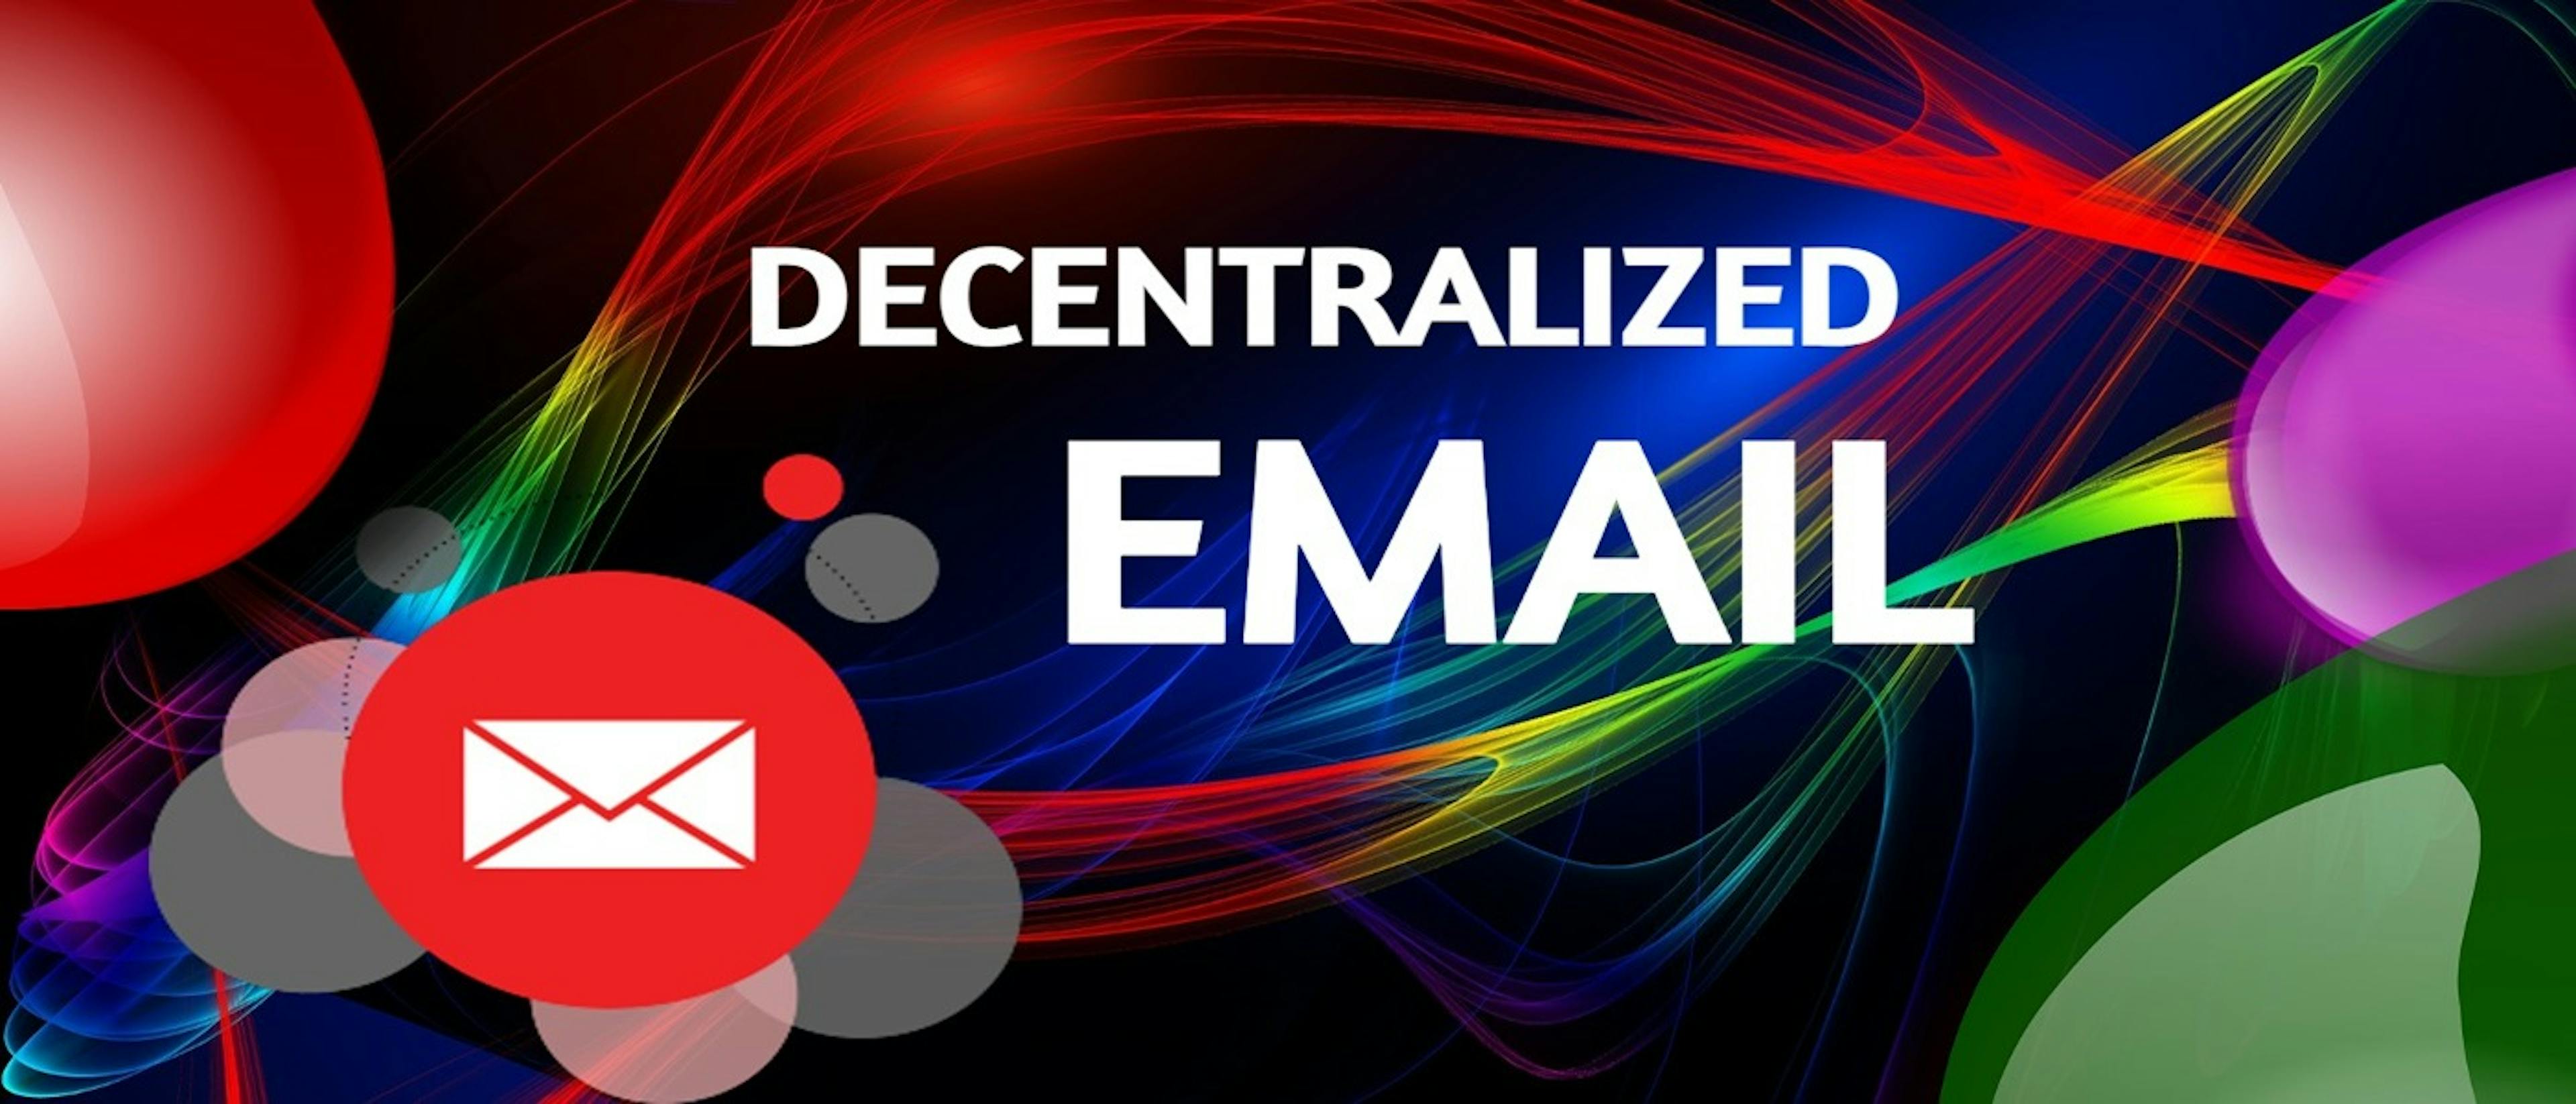 featured image - This Is How You Can Develop a Decentralized Email System on the Blockchain